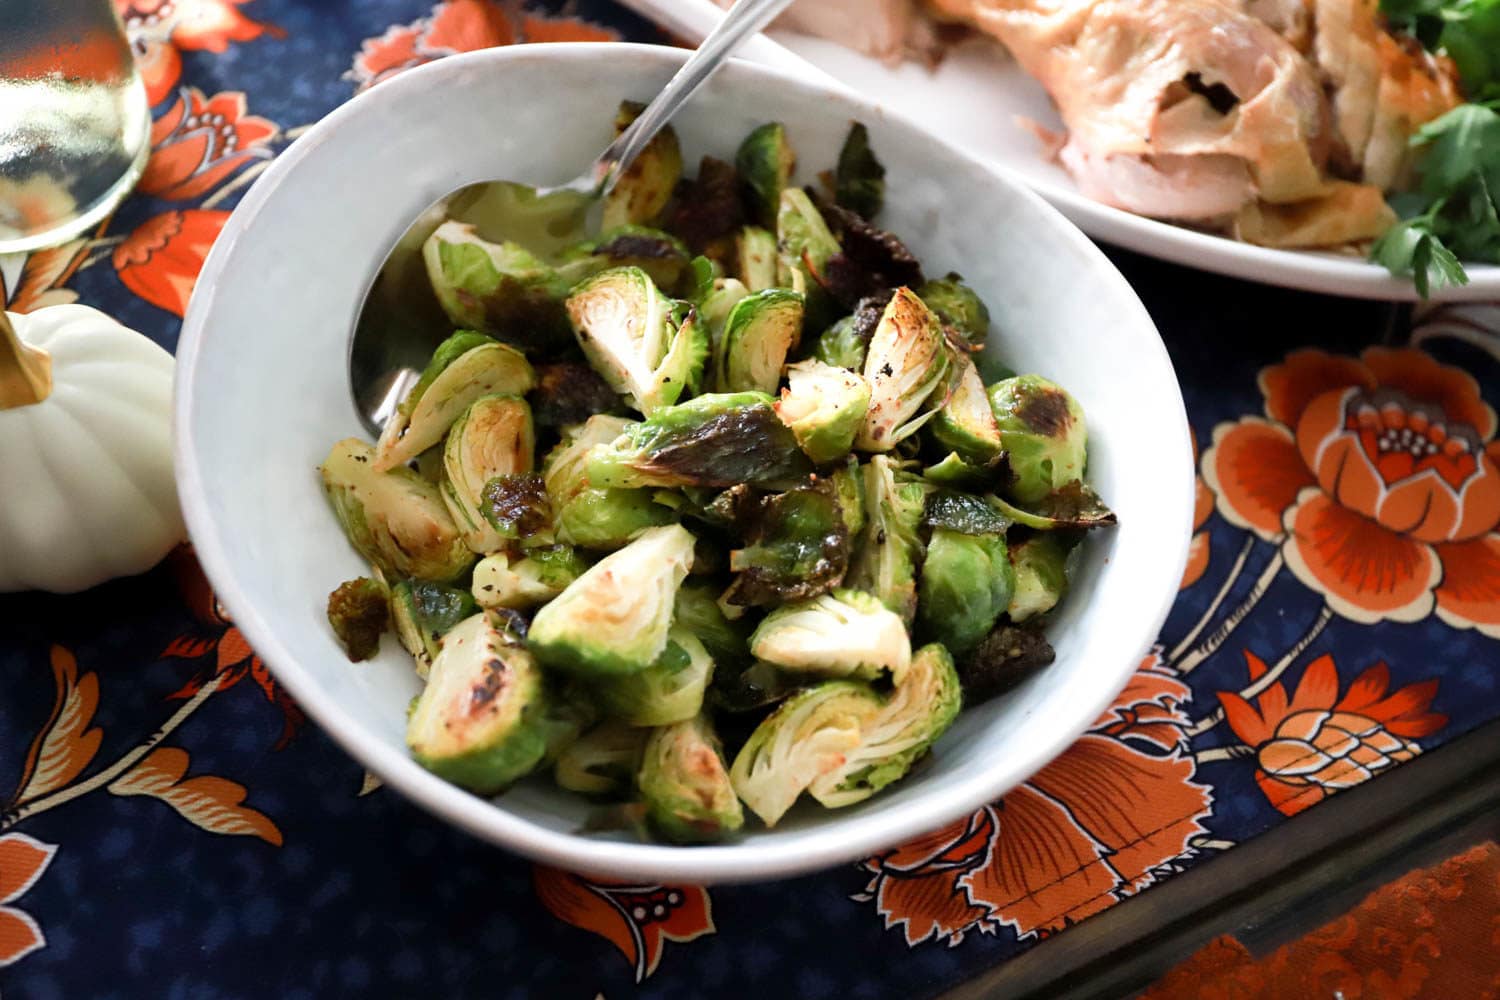 oven roasted, spiced brussels sprouts for Thanksgiving